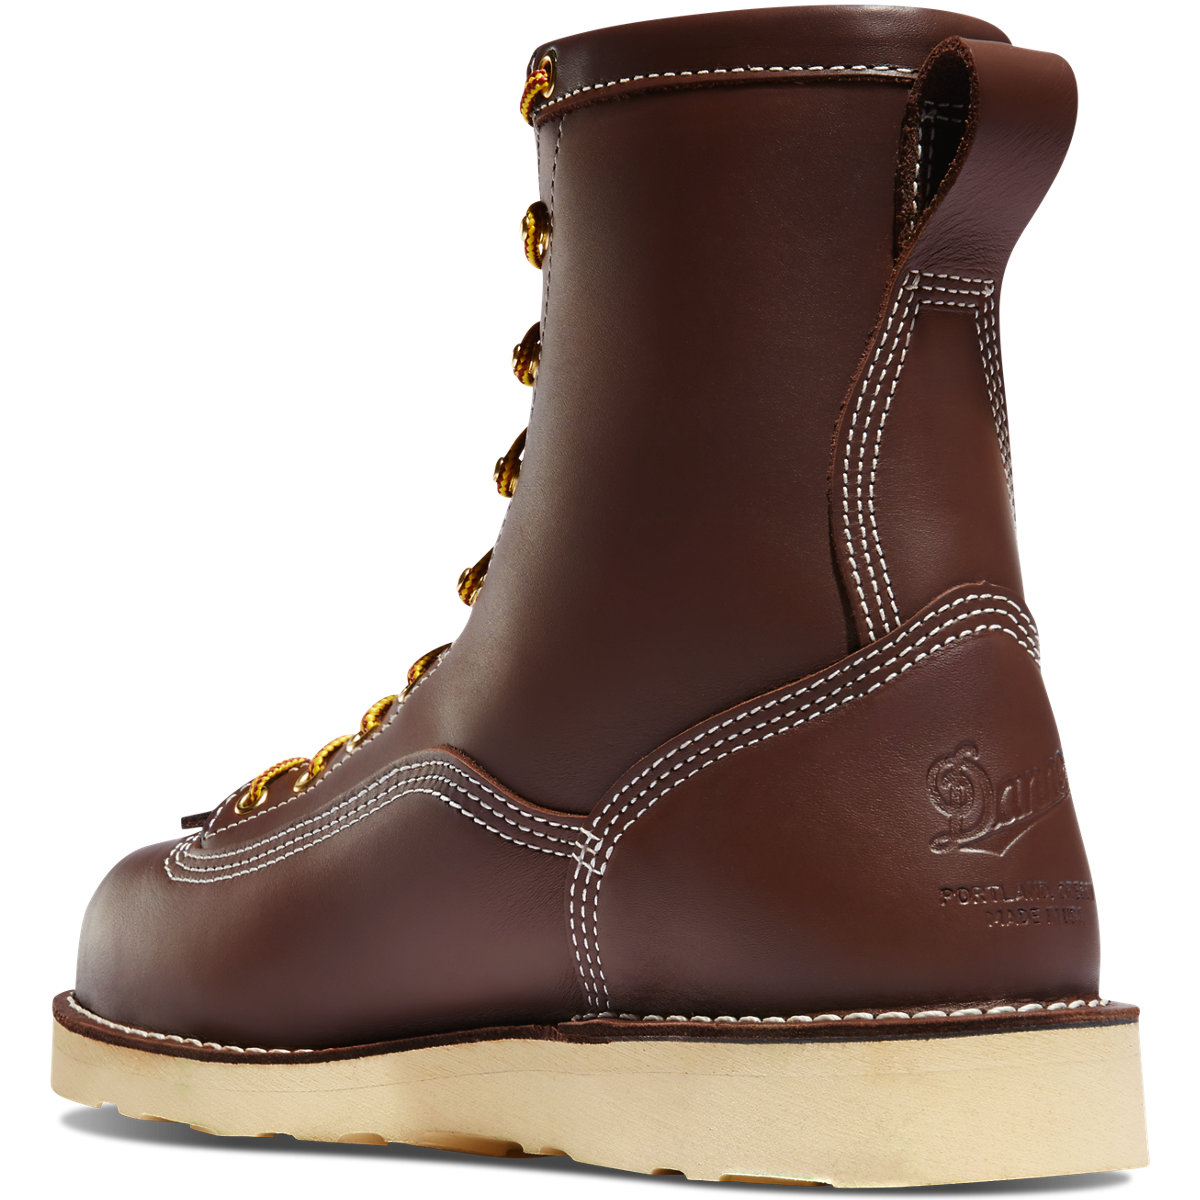 Danner - Power Foreman Brown Composite Toe (NMT)